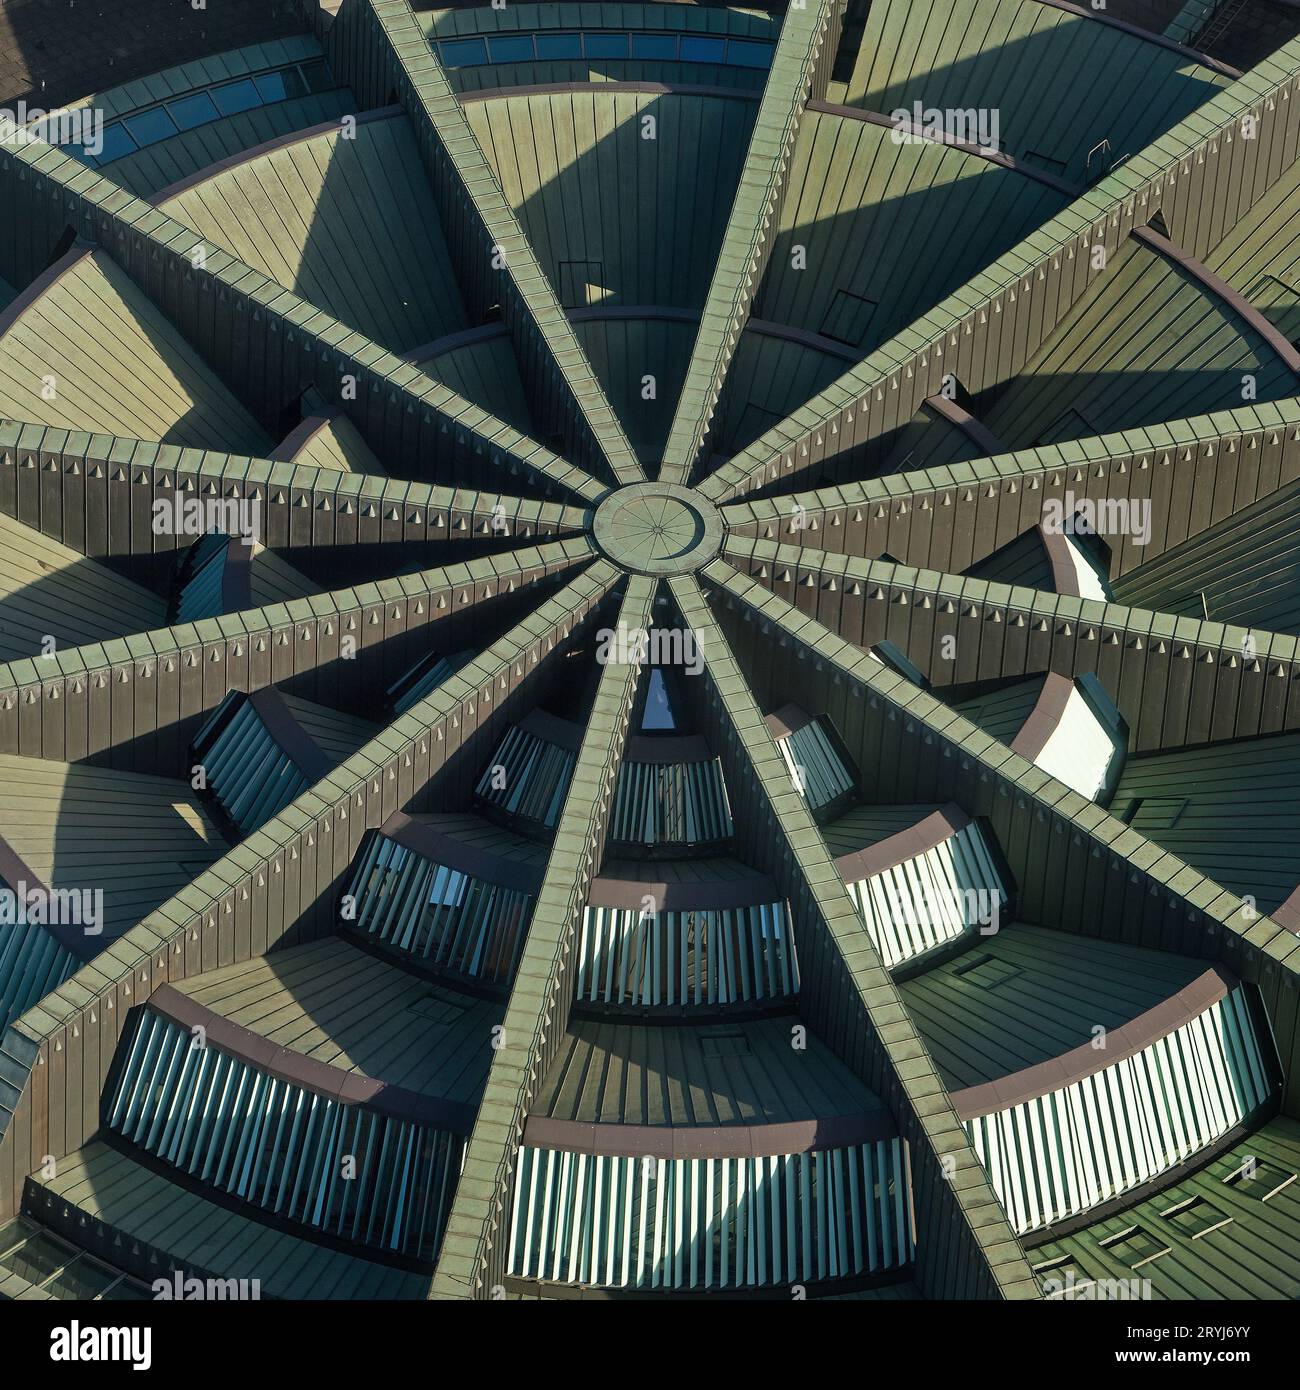 State parliament building NRW in structuralism style seen from above, Duesseldorf, Germany, Europe Stock Photo